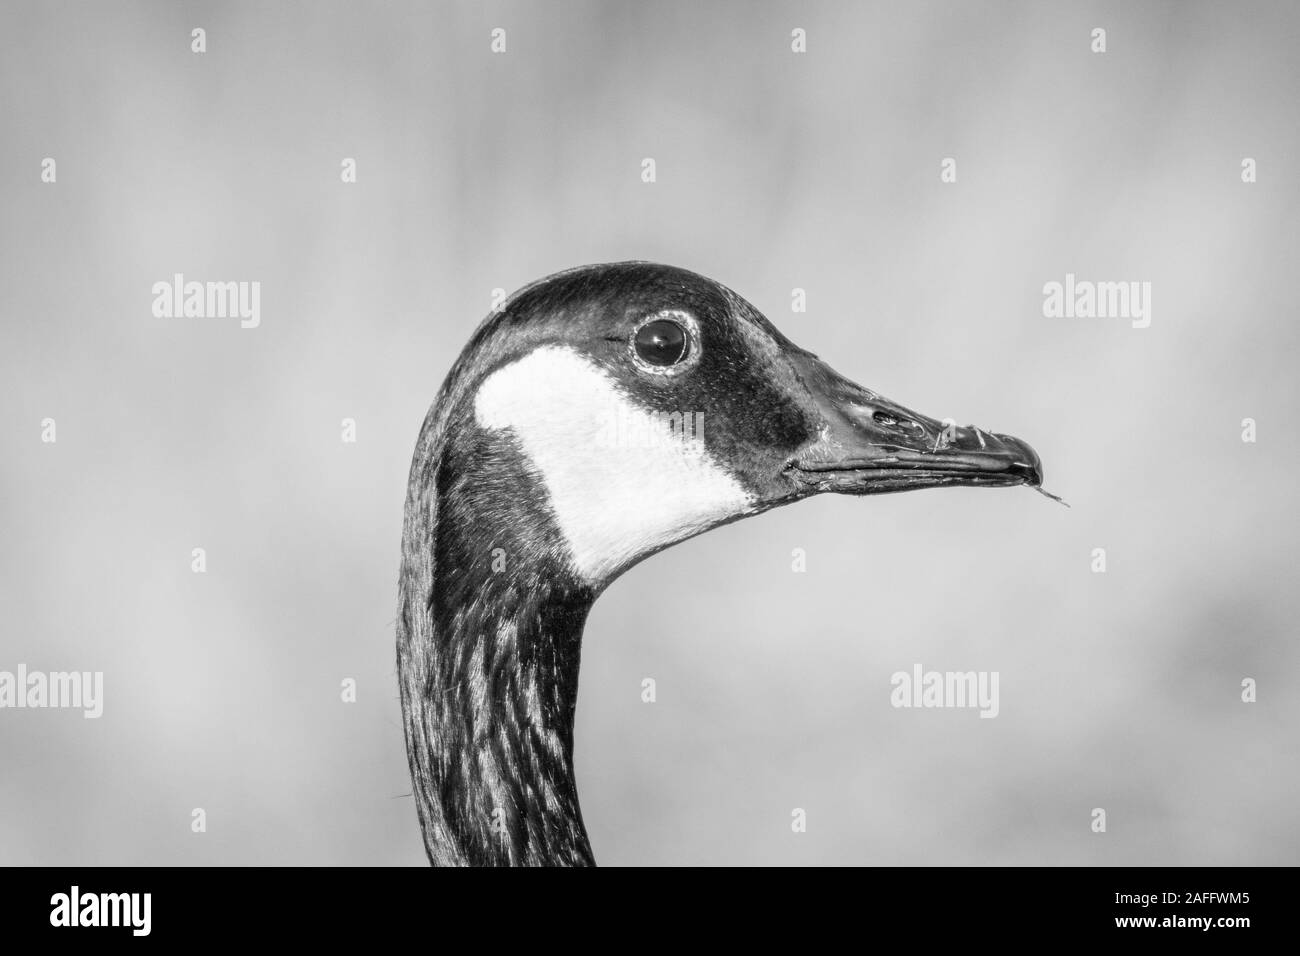 Canada Goose (Branta canadensis) head and neck in profile on autumnal day. Showing distinctive black face with white chinstrap. Monochrome. Stock Photo